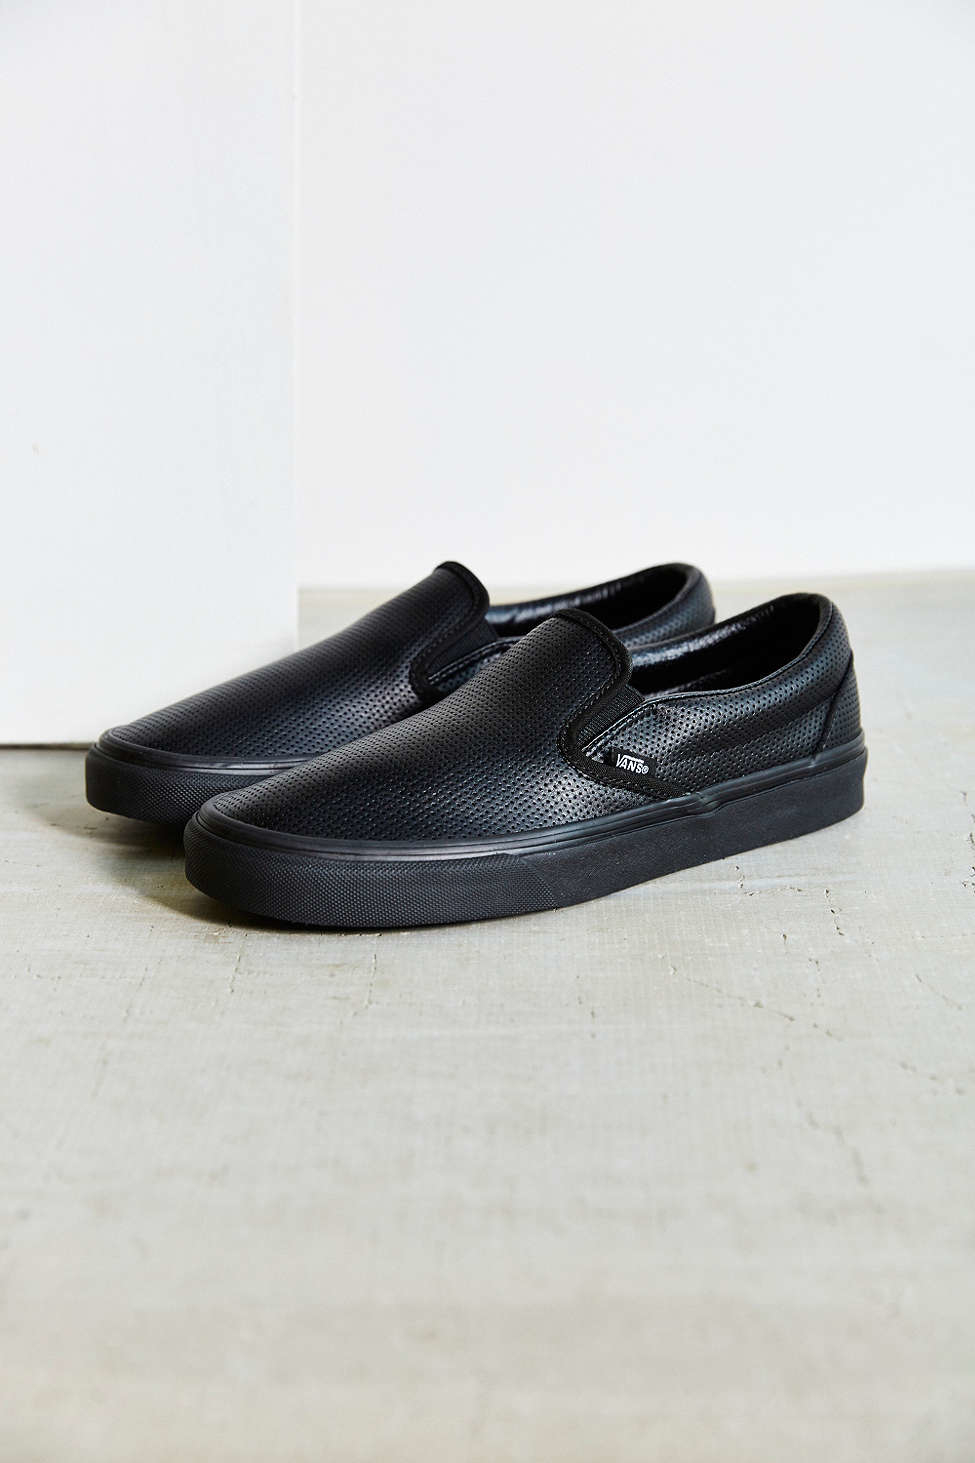 vans classic slip on shoes black perforated leather